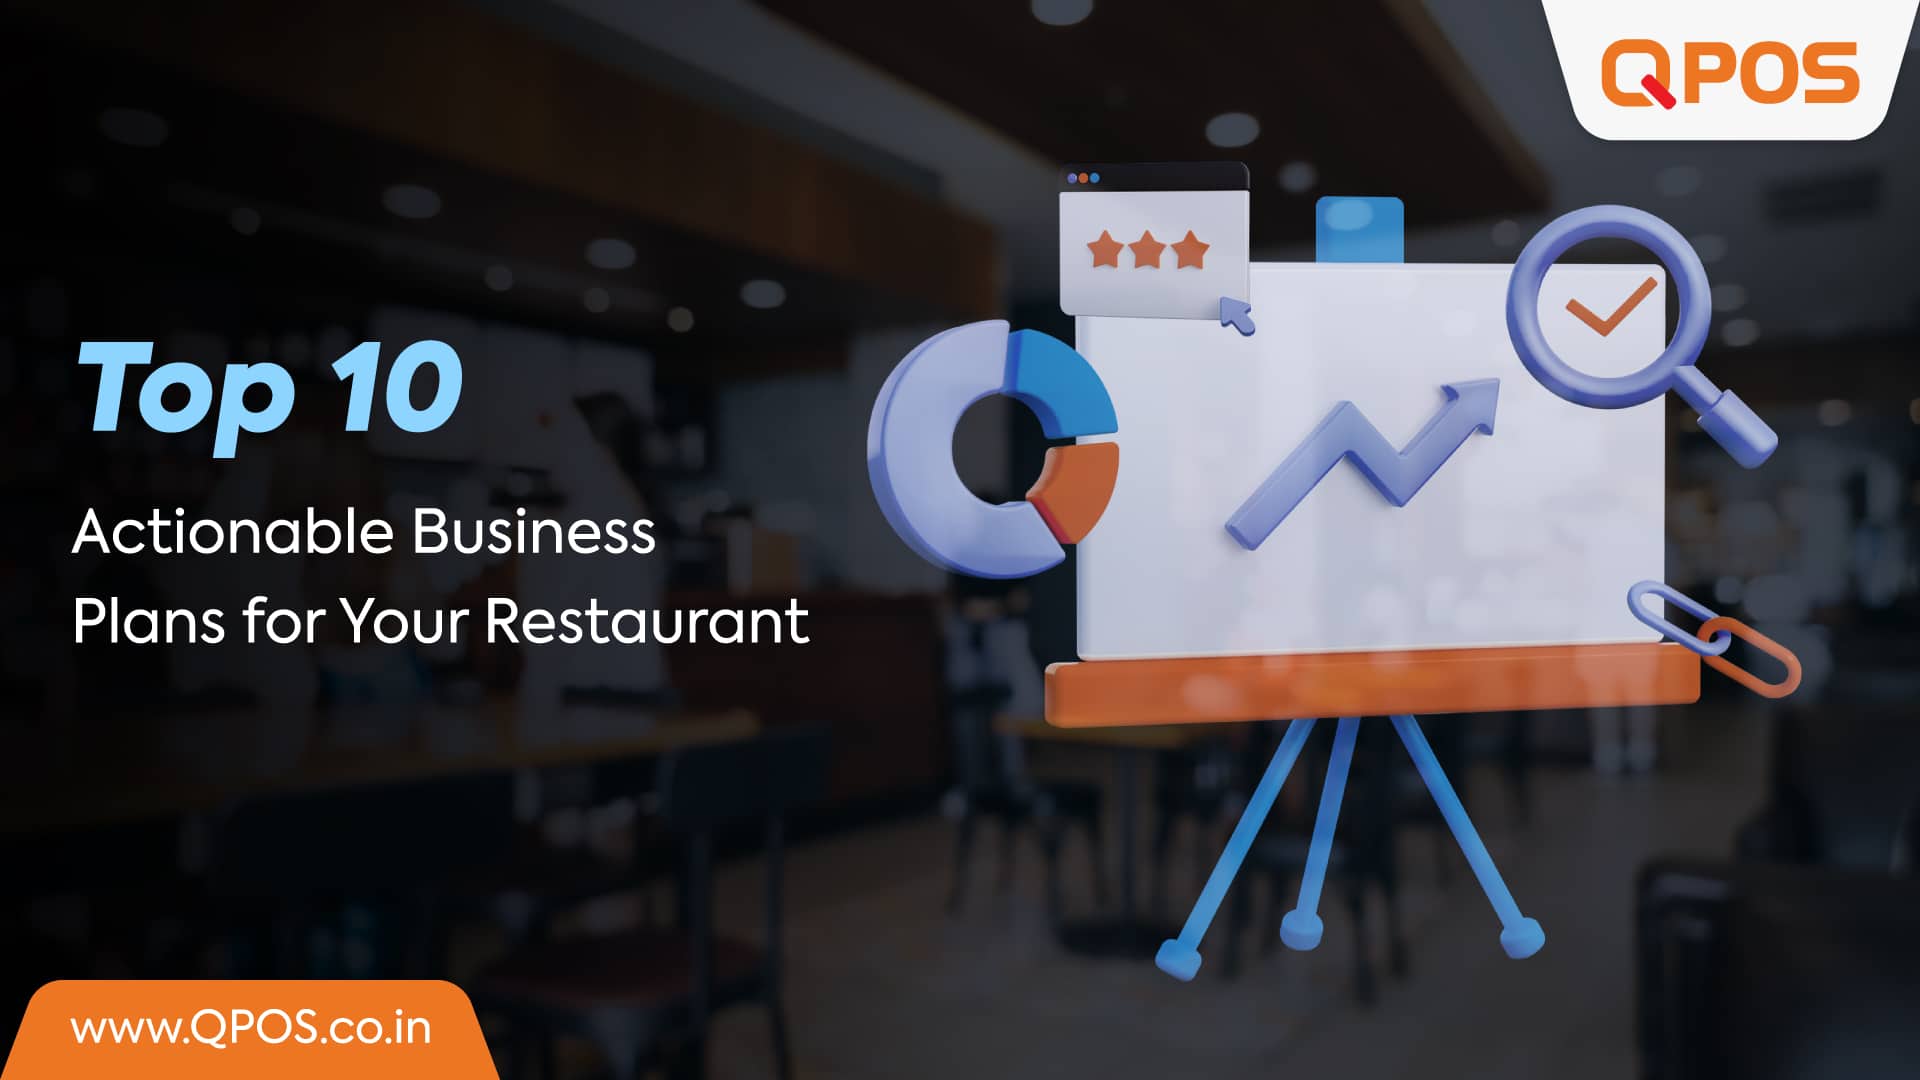 Top 10 Actionable Business Plans for Your Restaurant